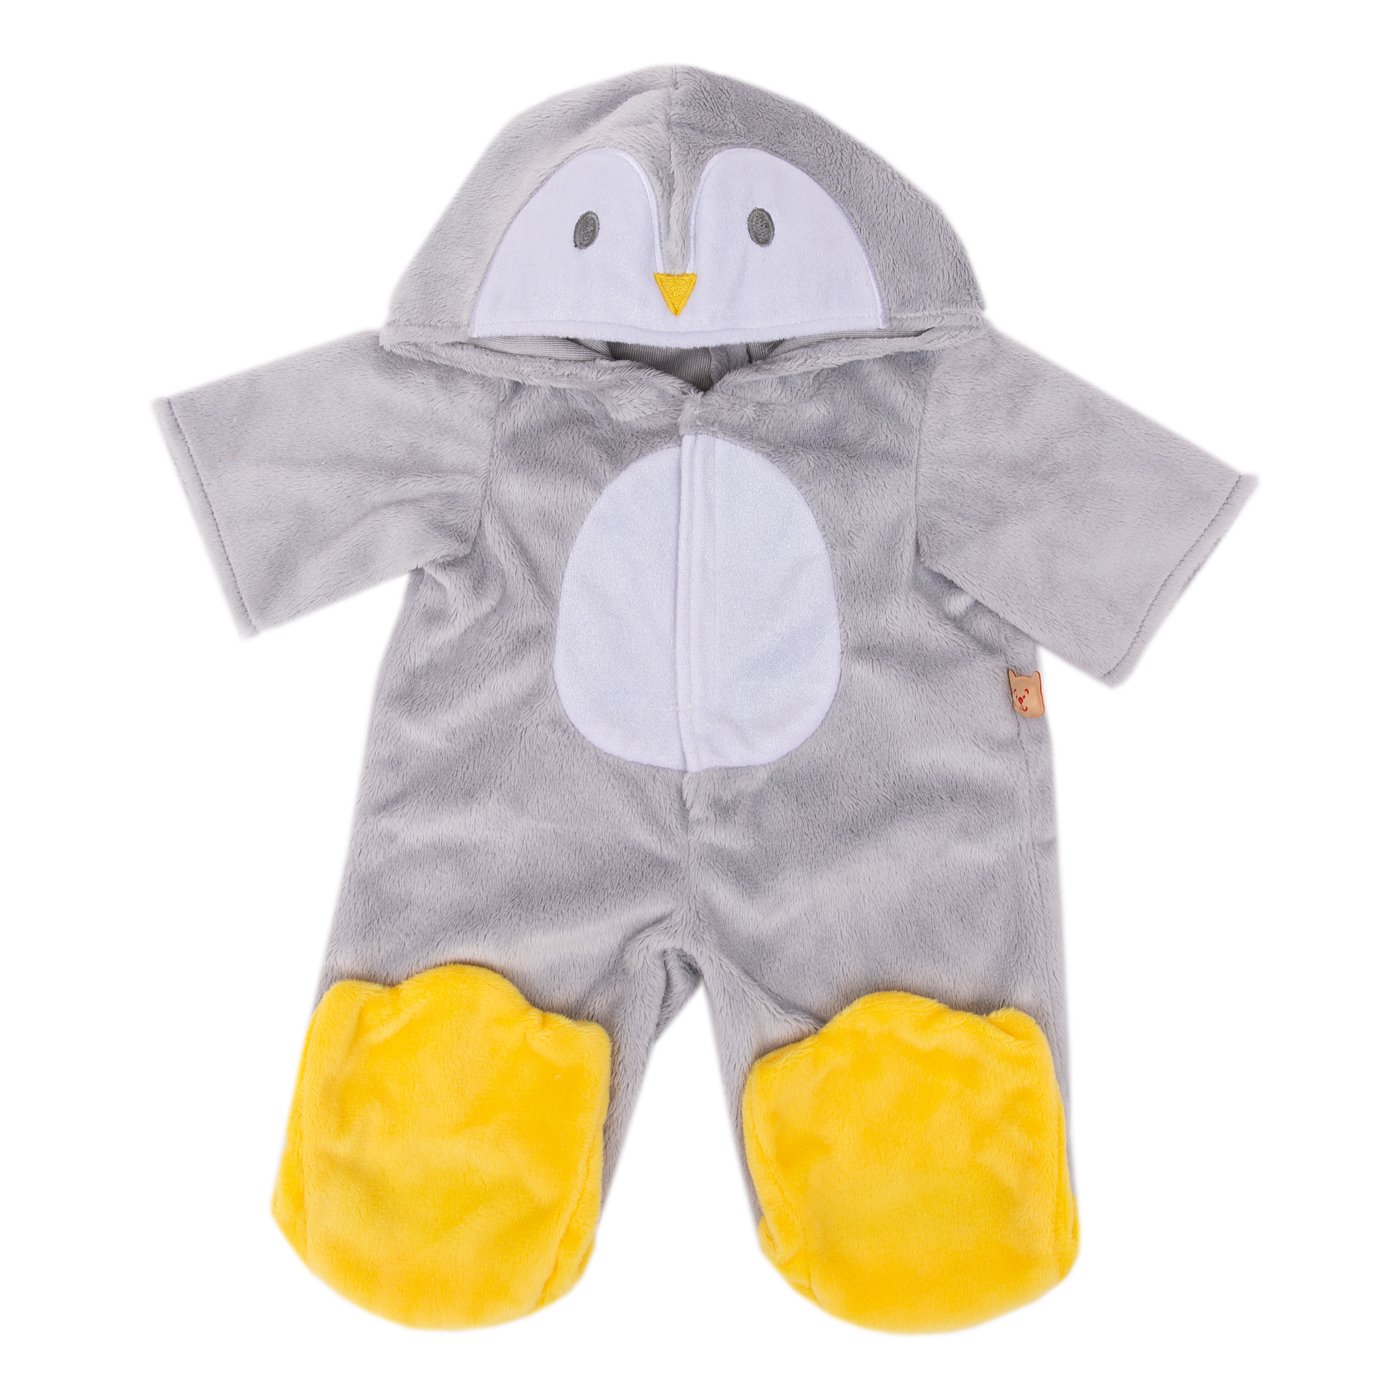 DesignaBear Penguin All In One Dolls Outfit